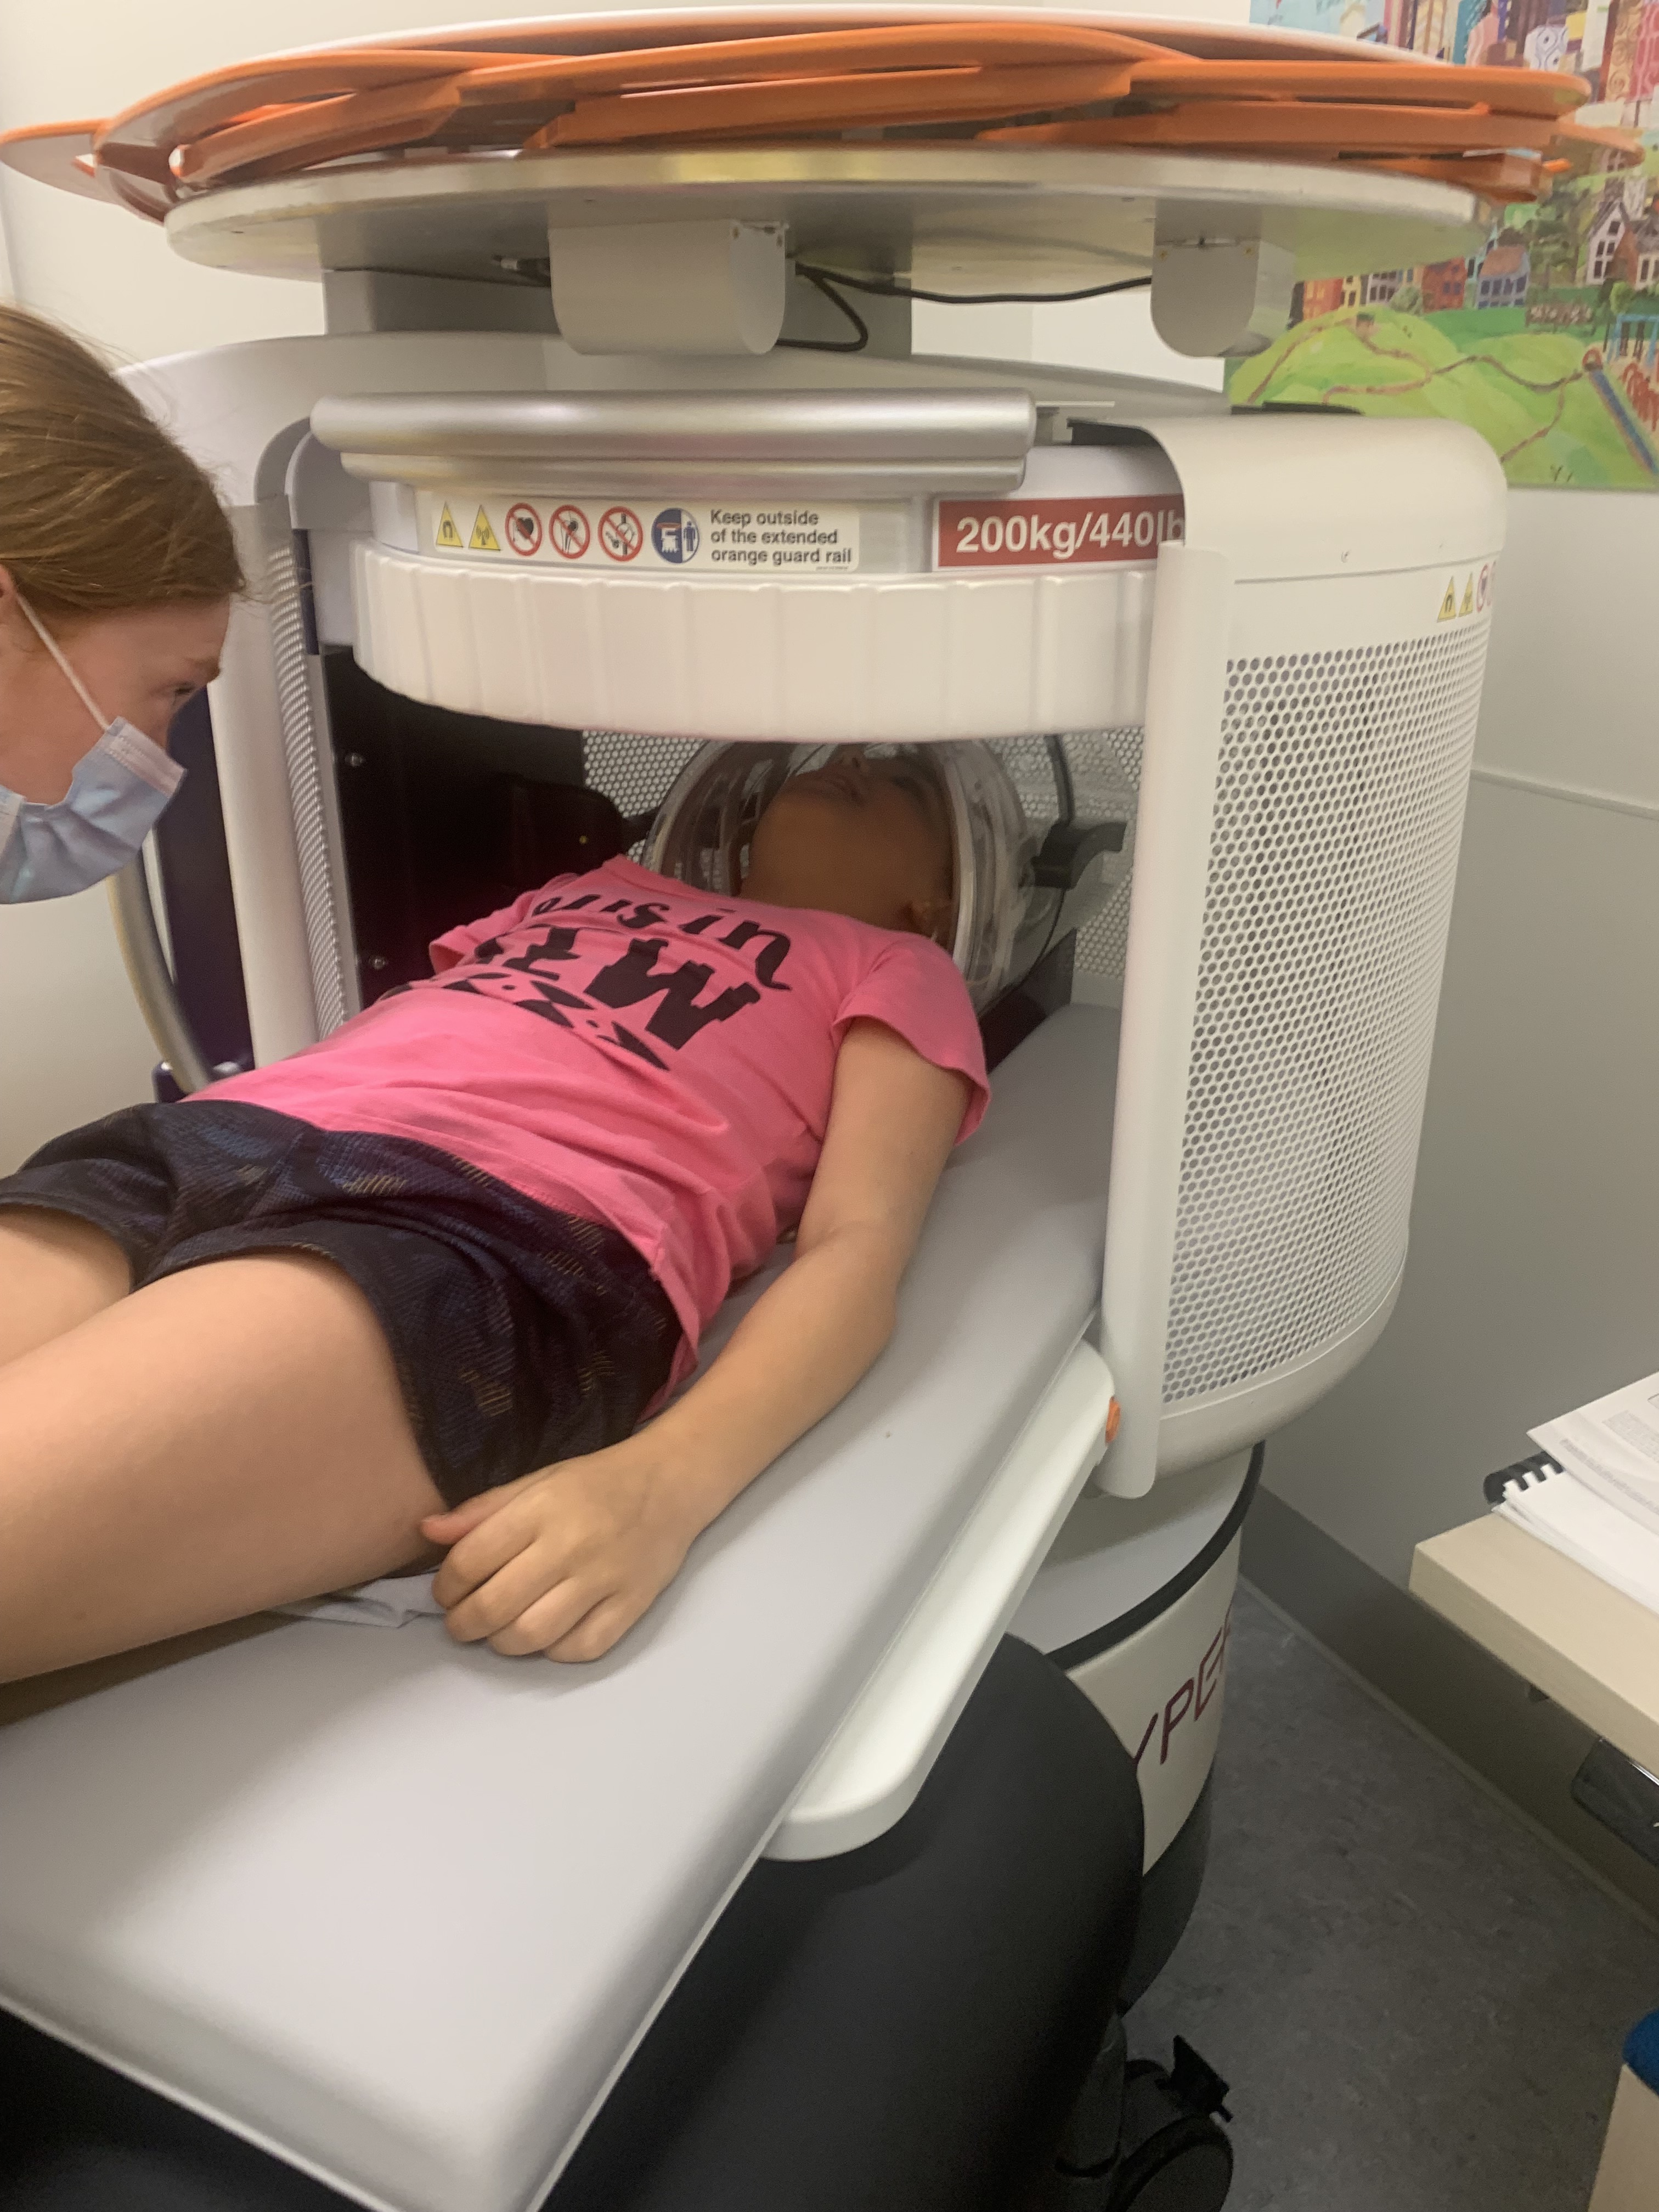 A girl in a pink shirt and black shorts lays in an MRI machine that scans her brain.